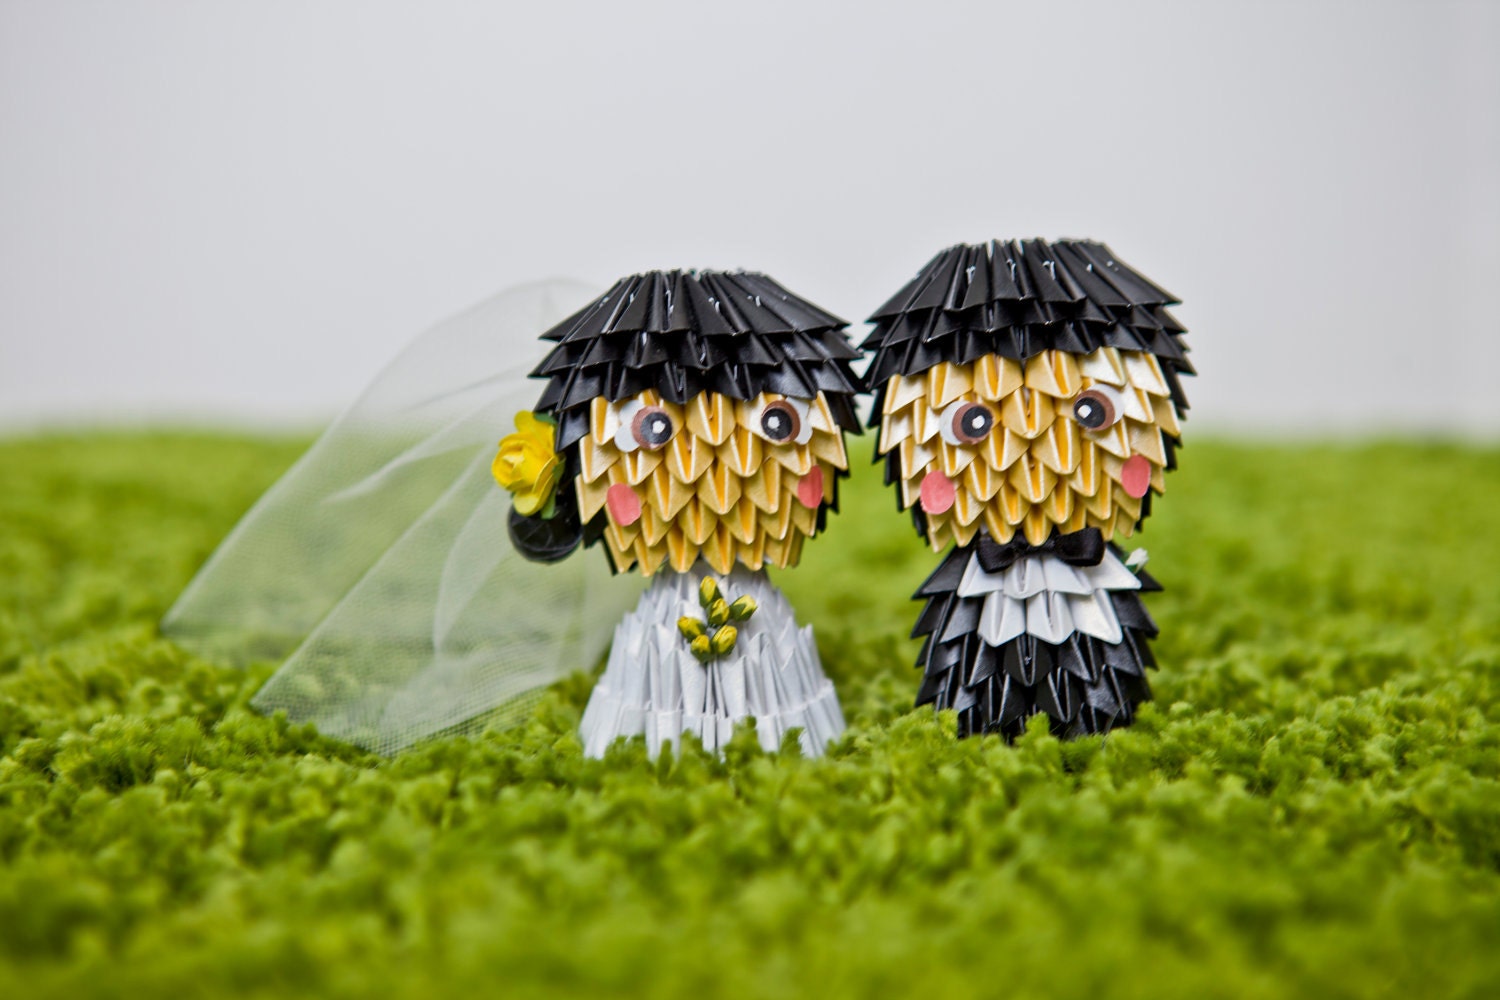 Personalized Oriental Bride and Groom 3D Origami Wedding Cake Topper